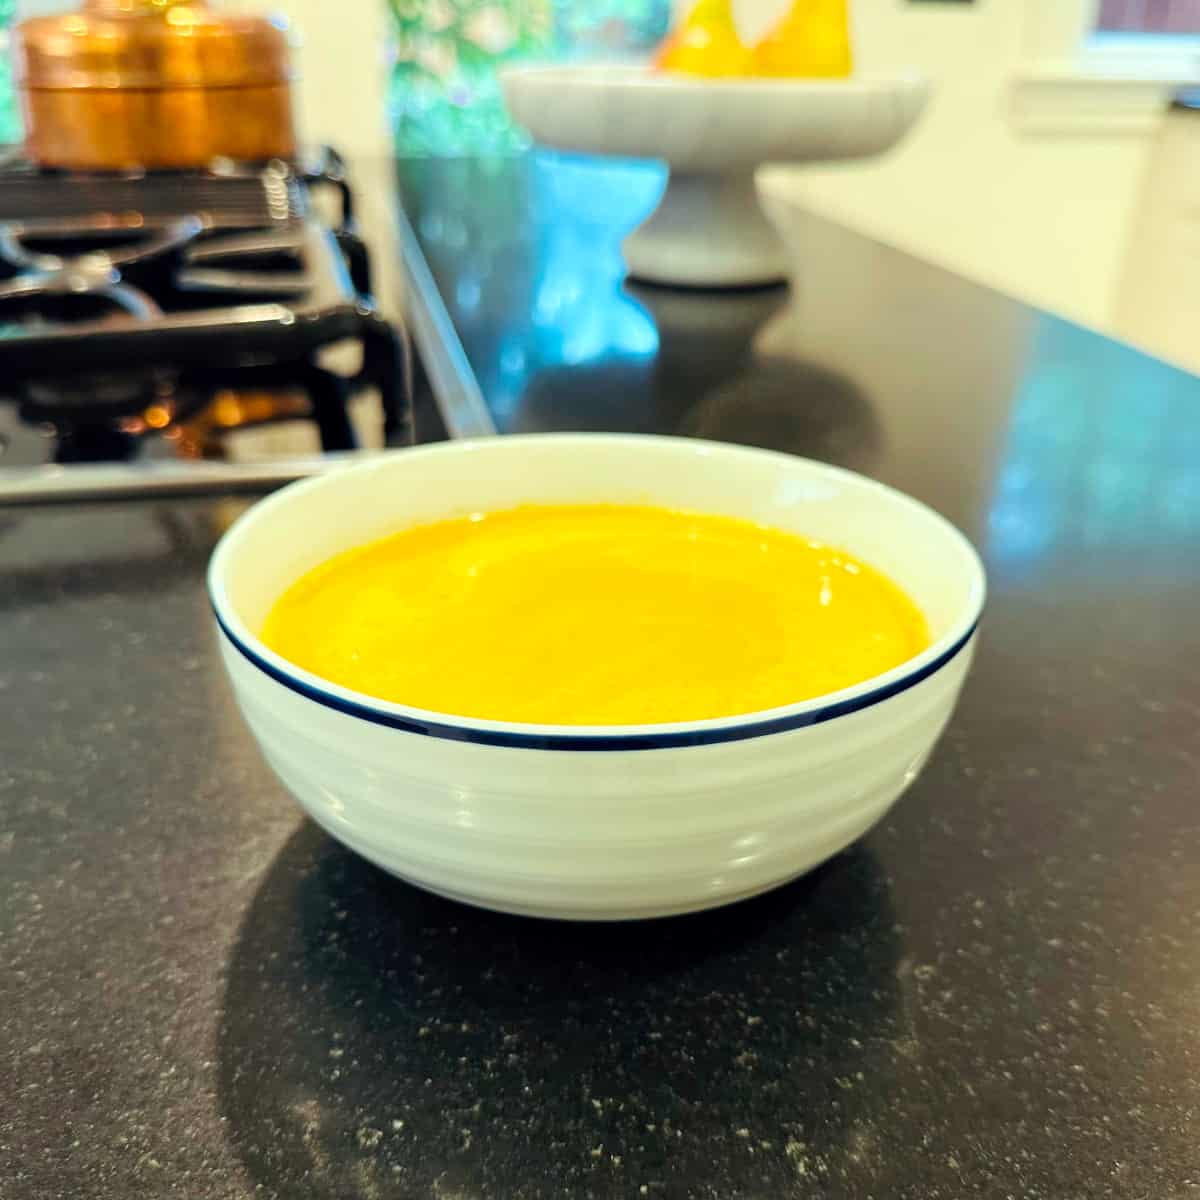 Curried pumpkin soup in a white bowl with a navy stripe around the edge.